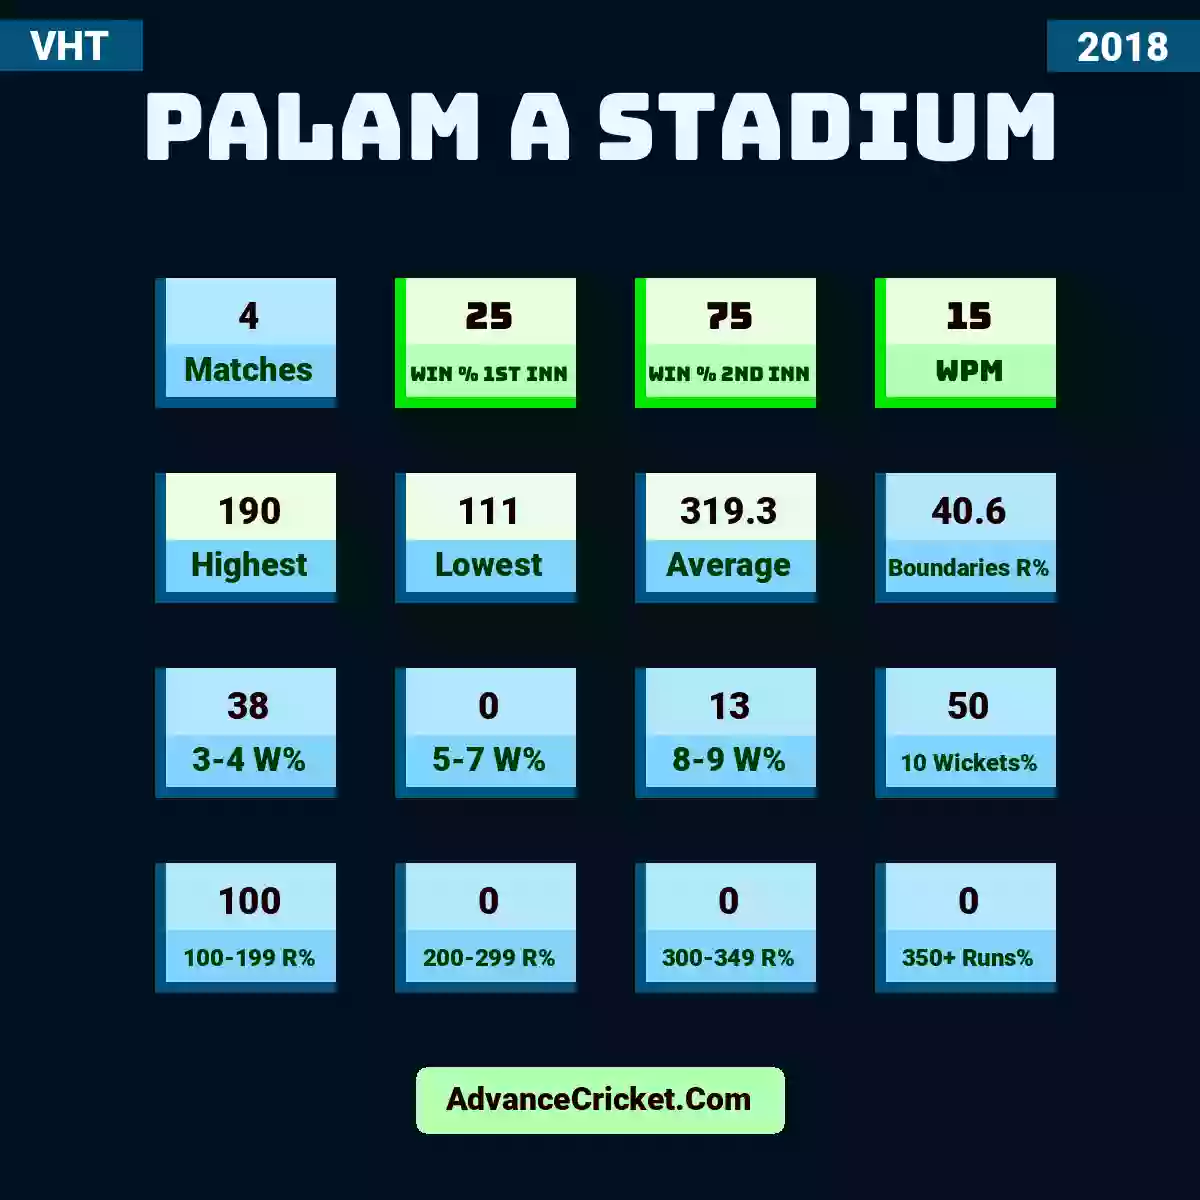 Image showing Palam A Stadium with Matches: 4, Win % 1st Inn: 25, Win % 2nd Inn: 75, WPM: 15, Highest: 190, Lowest: 111, Average: 319.3, Boundaries R%: 40.6, 3-4 W%: 38, 5-7 W%: 0, 8-9 W%: 13, 10 Wickets%: 50, 100-199 R%: 100, 200-299 R%: 0, 300-349 R%: 0, 350+ Runs%: 0.